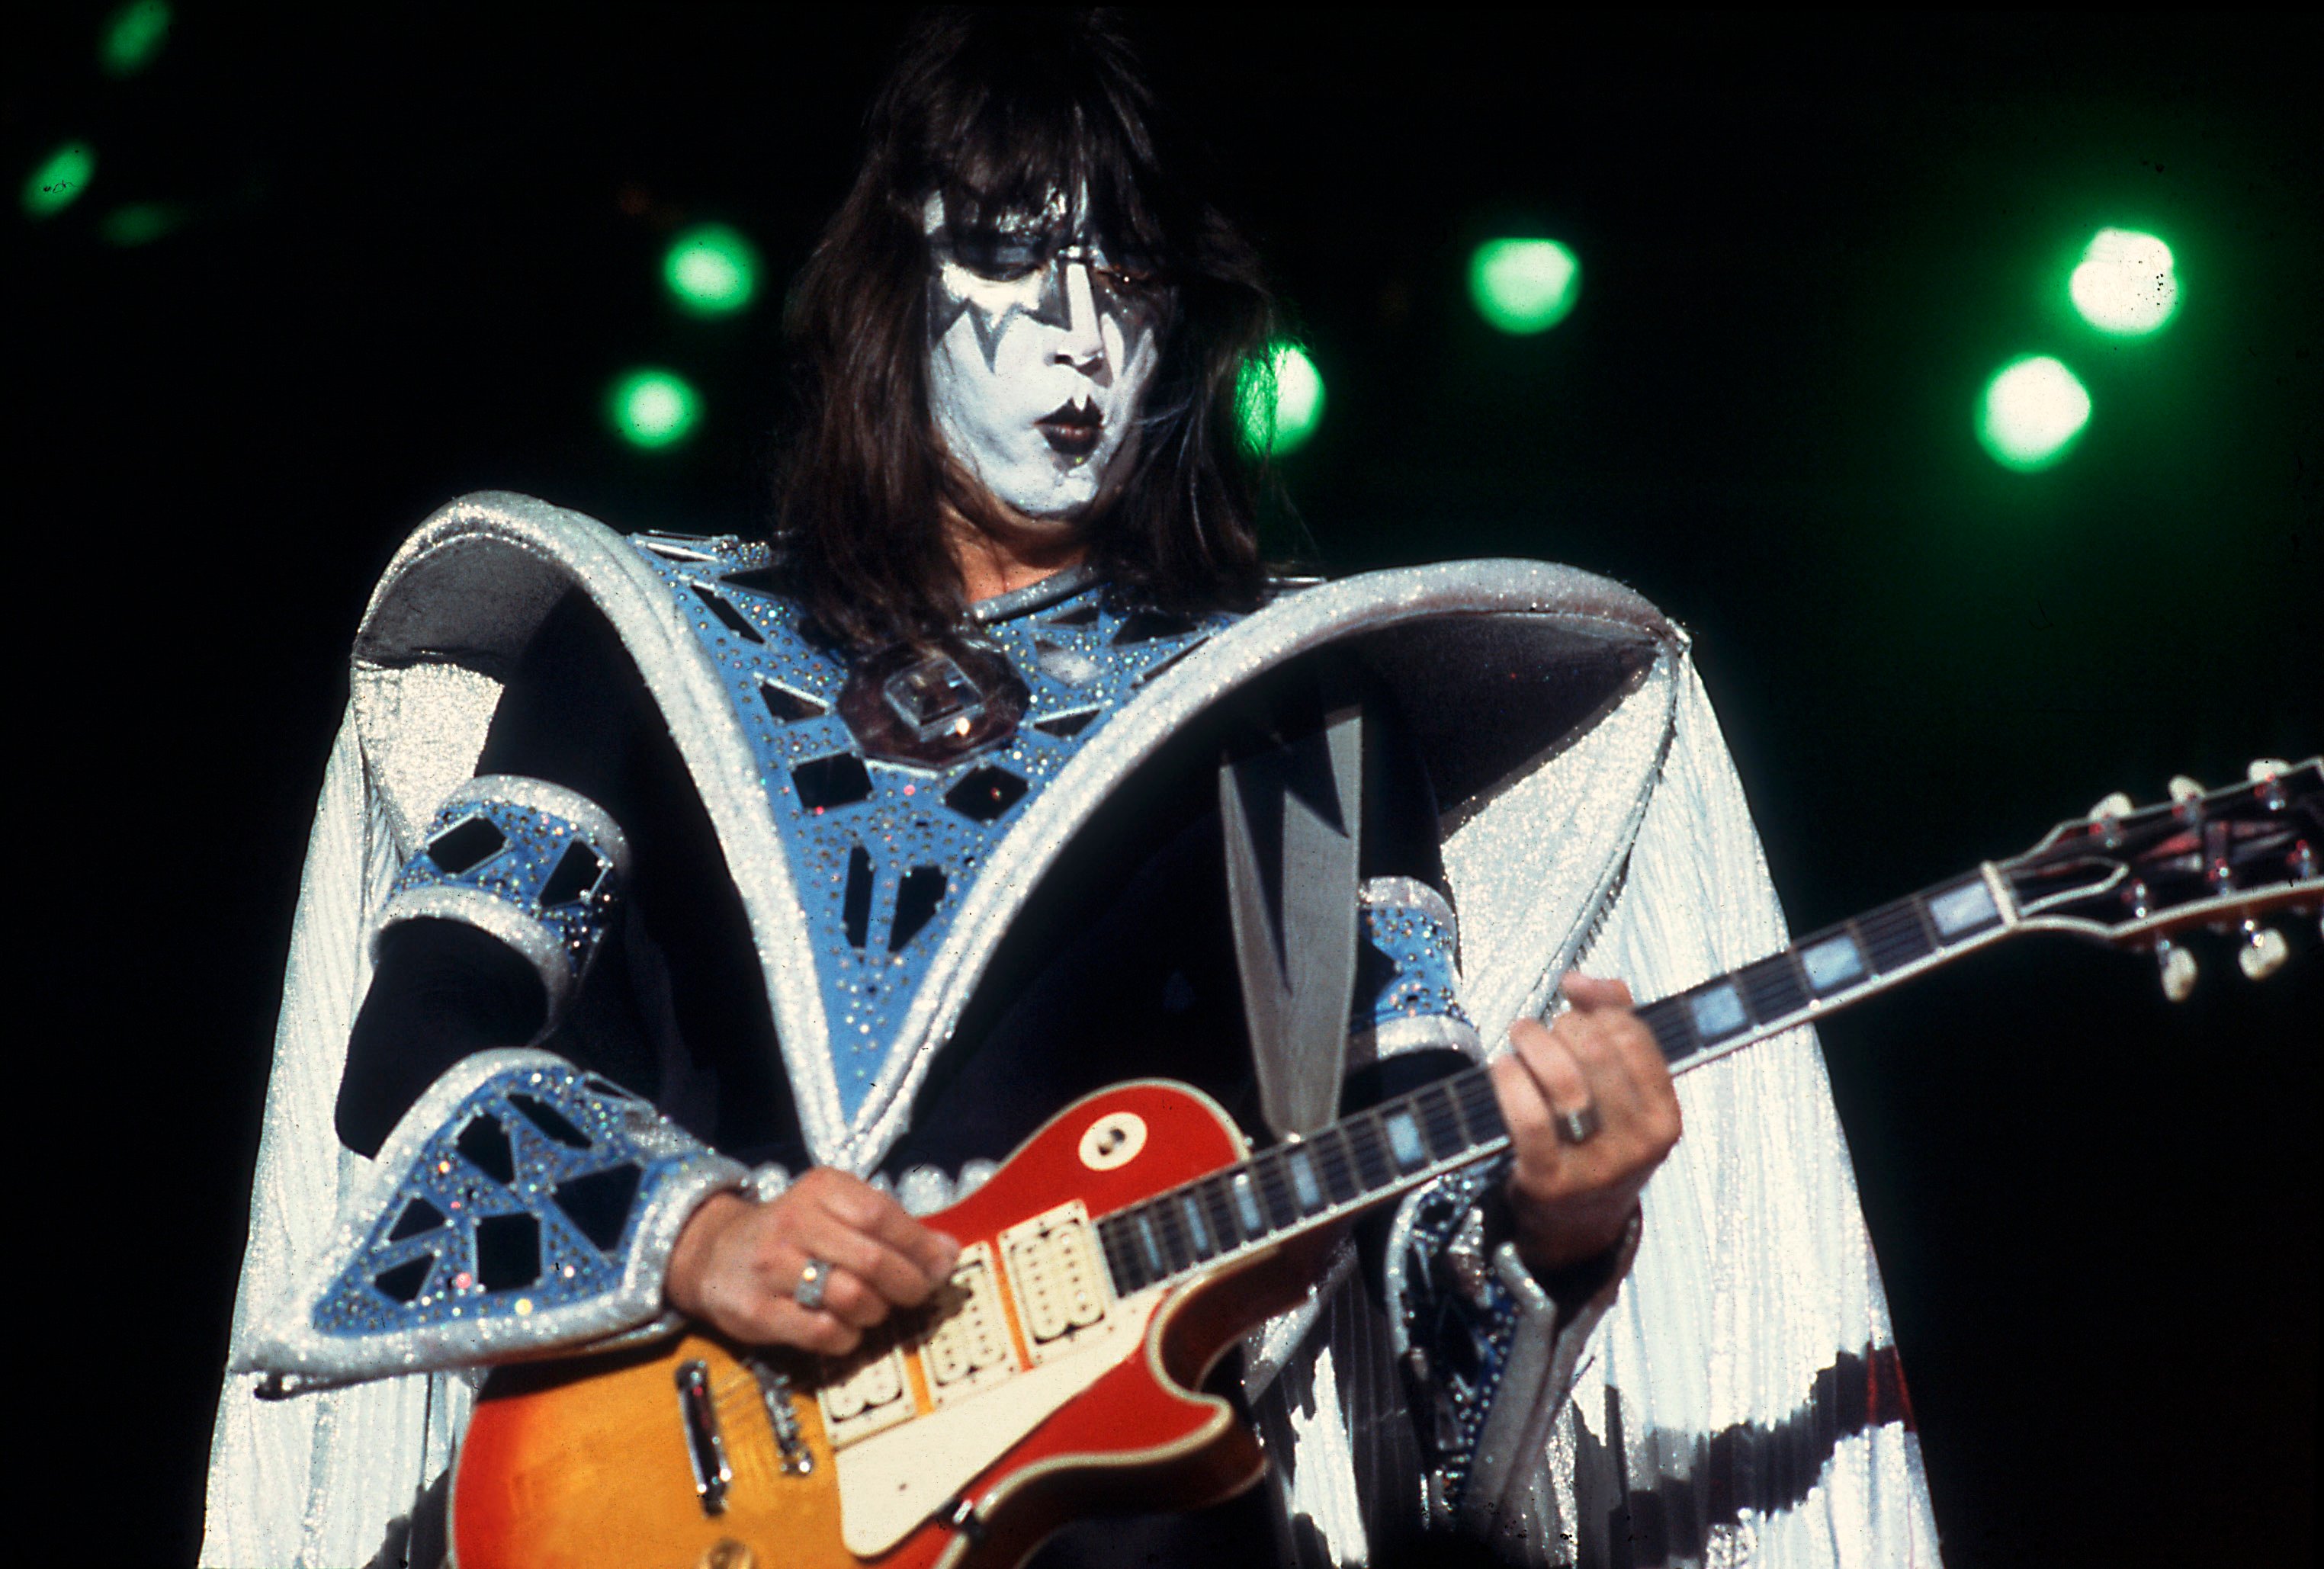 Ace Frehley in makeup